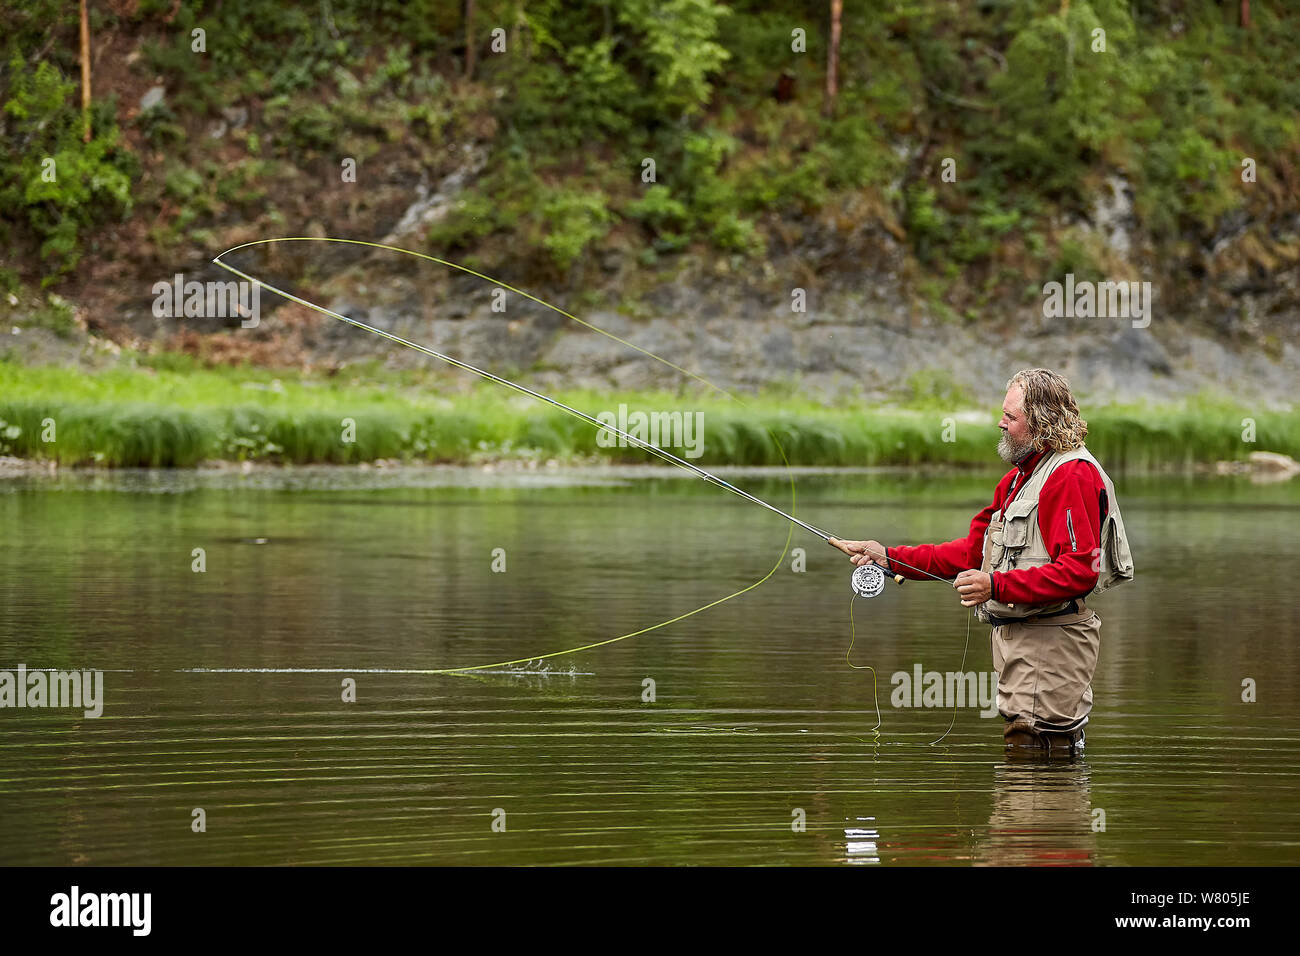 A fisherman catches fish on the river using fly fishing gear. Angler stands in  water above his knees, wearing a waterproof jumpsuit. Stock Photo